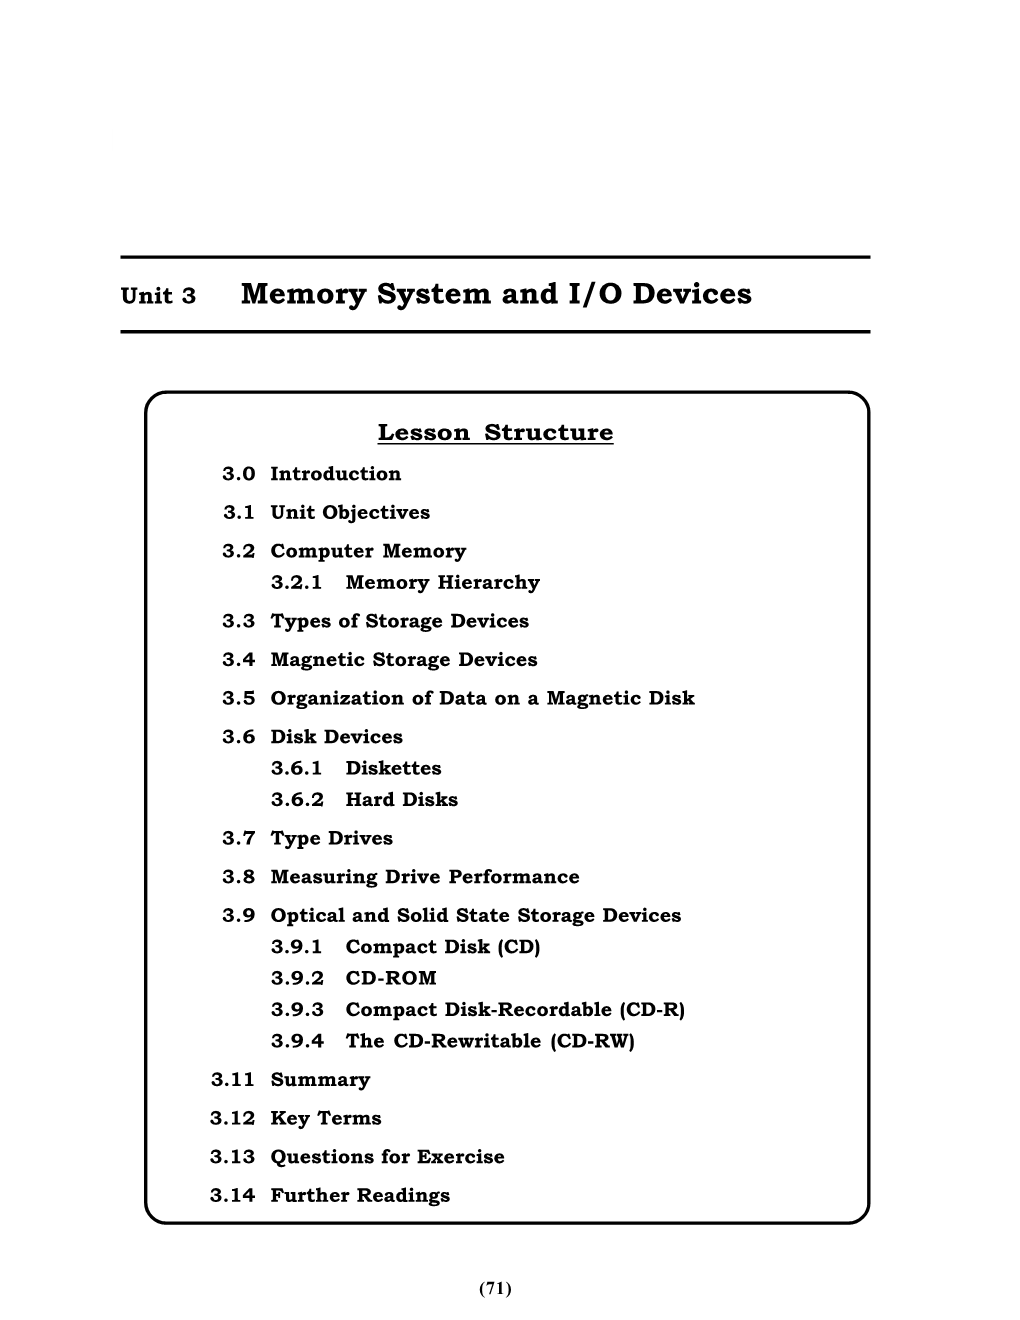 Memory System and I/O Devices